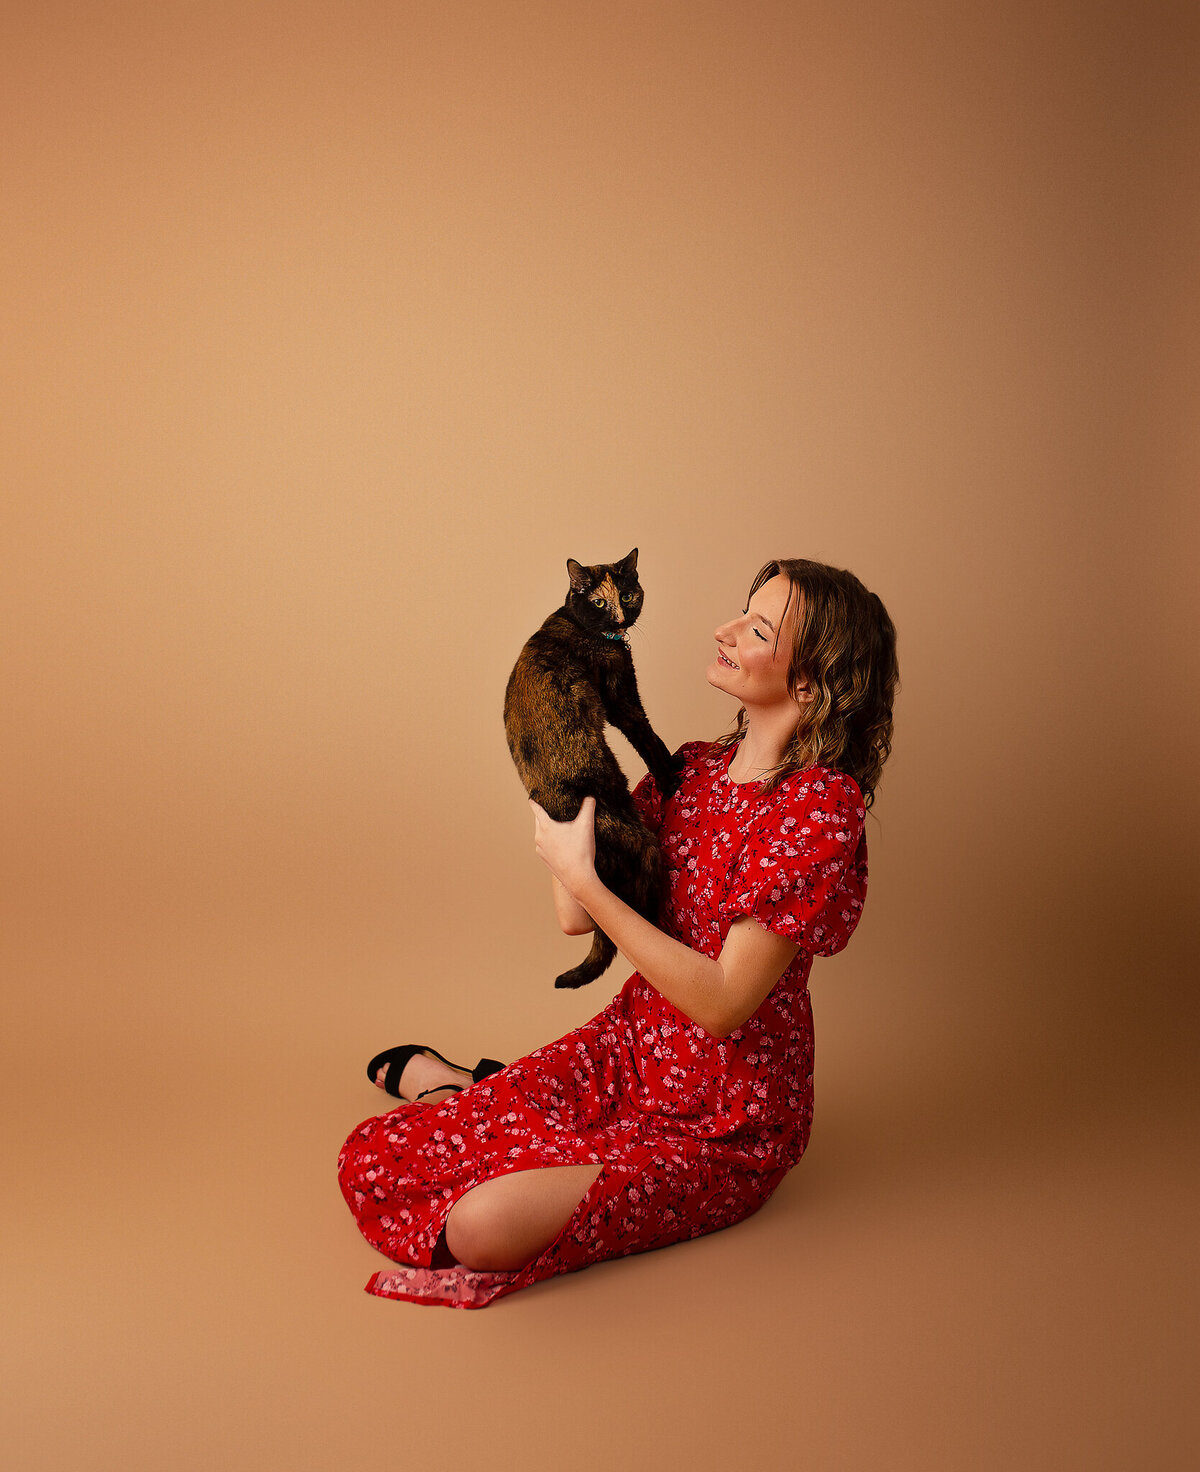 Studio senior session with cat and red dress